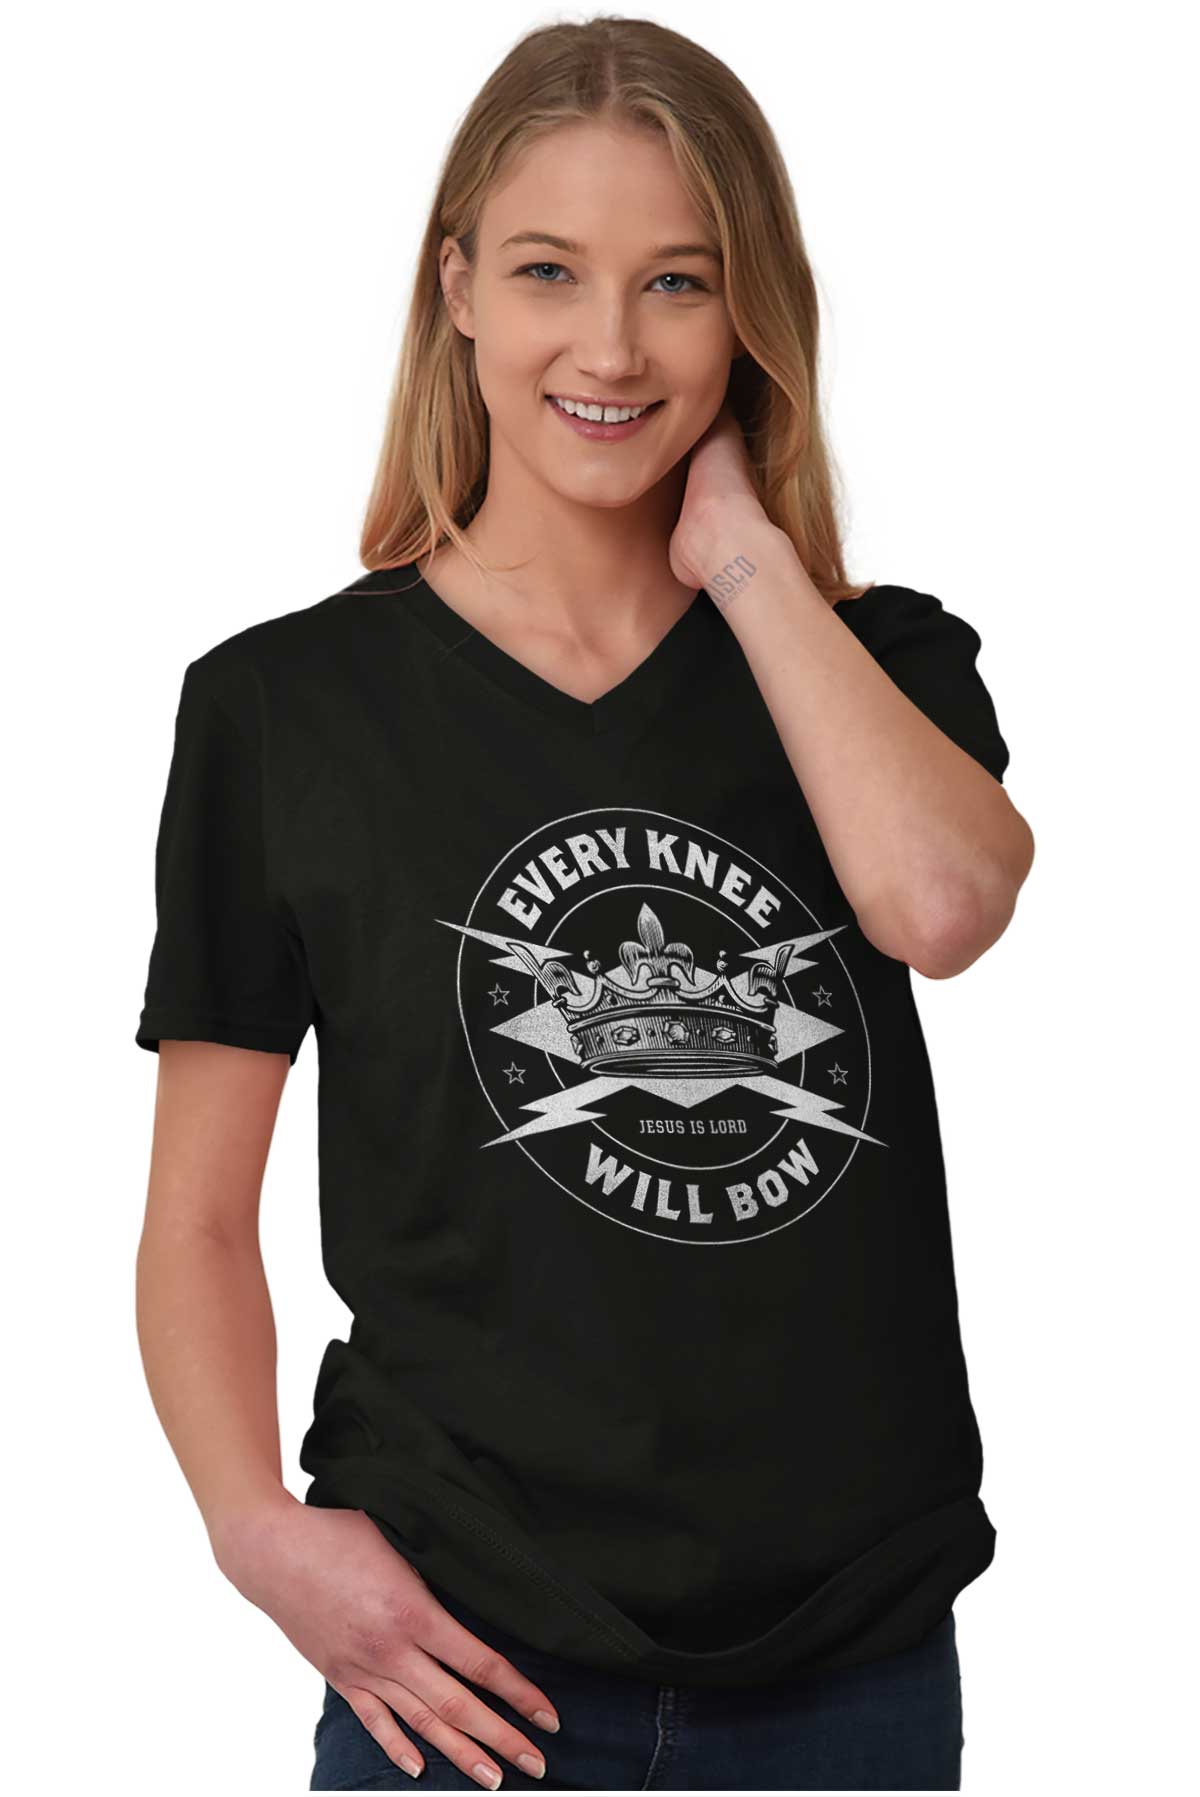 Every Knee Will Bow V-Neck Tee |Christian Strong